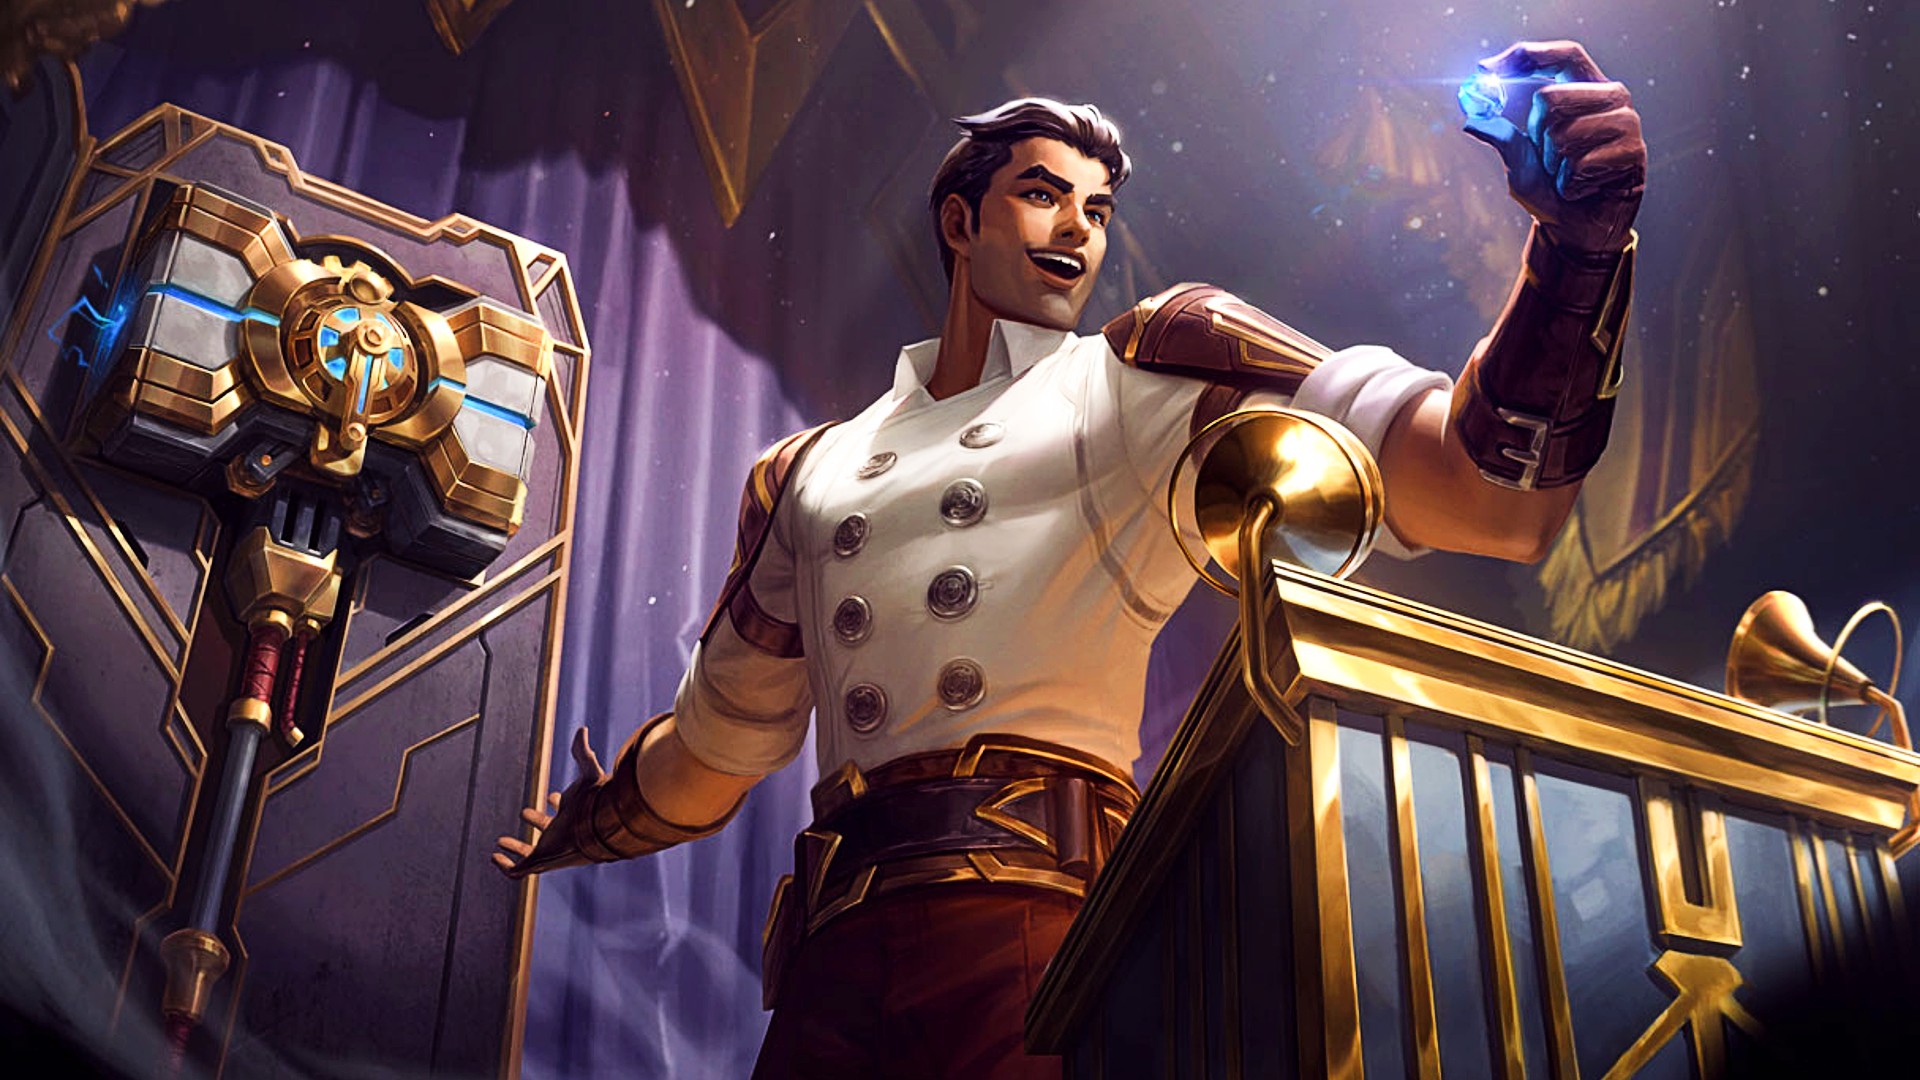 League of Legends’ next Arcane content adds a “new interactive experience”